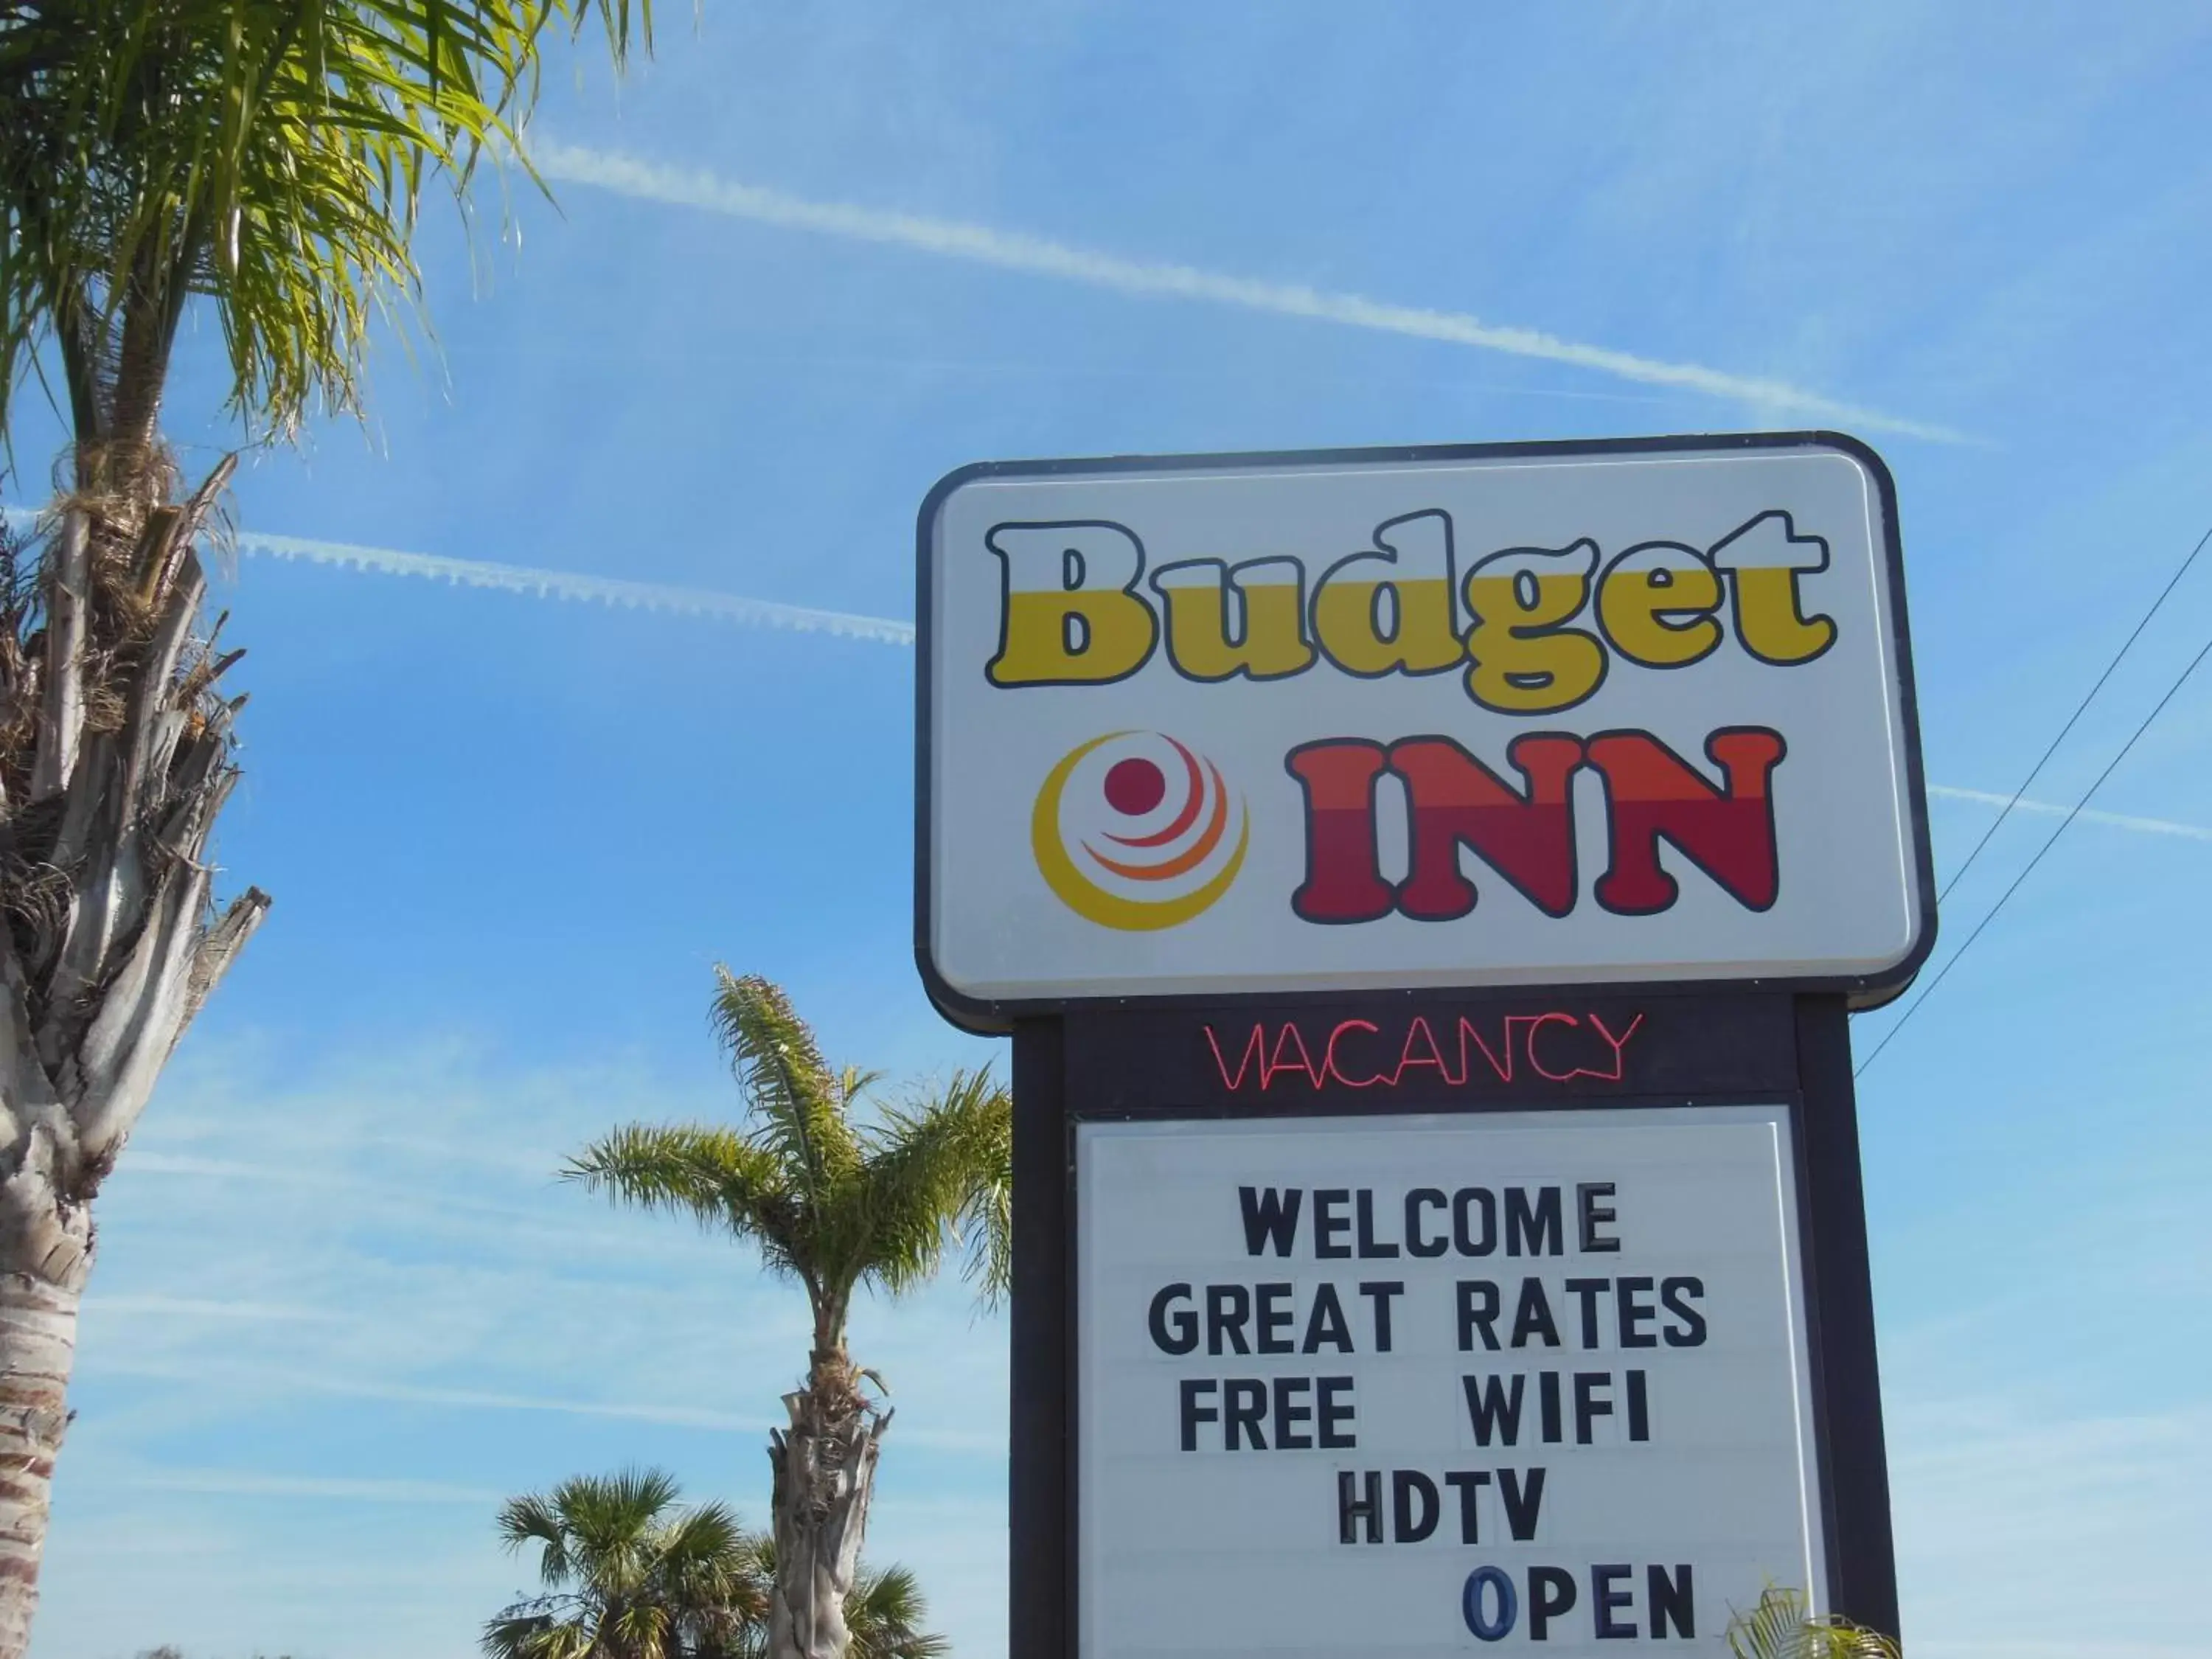 Property logo or sign in Budget Inn - Saint Augustine